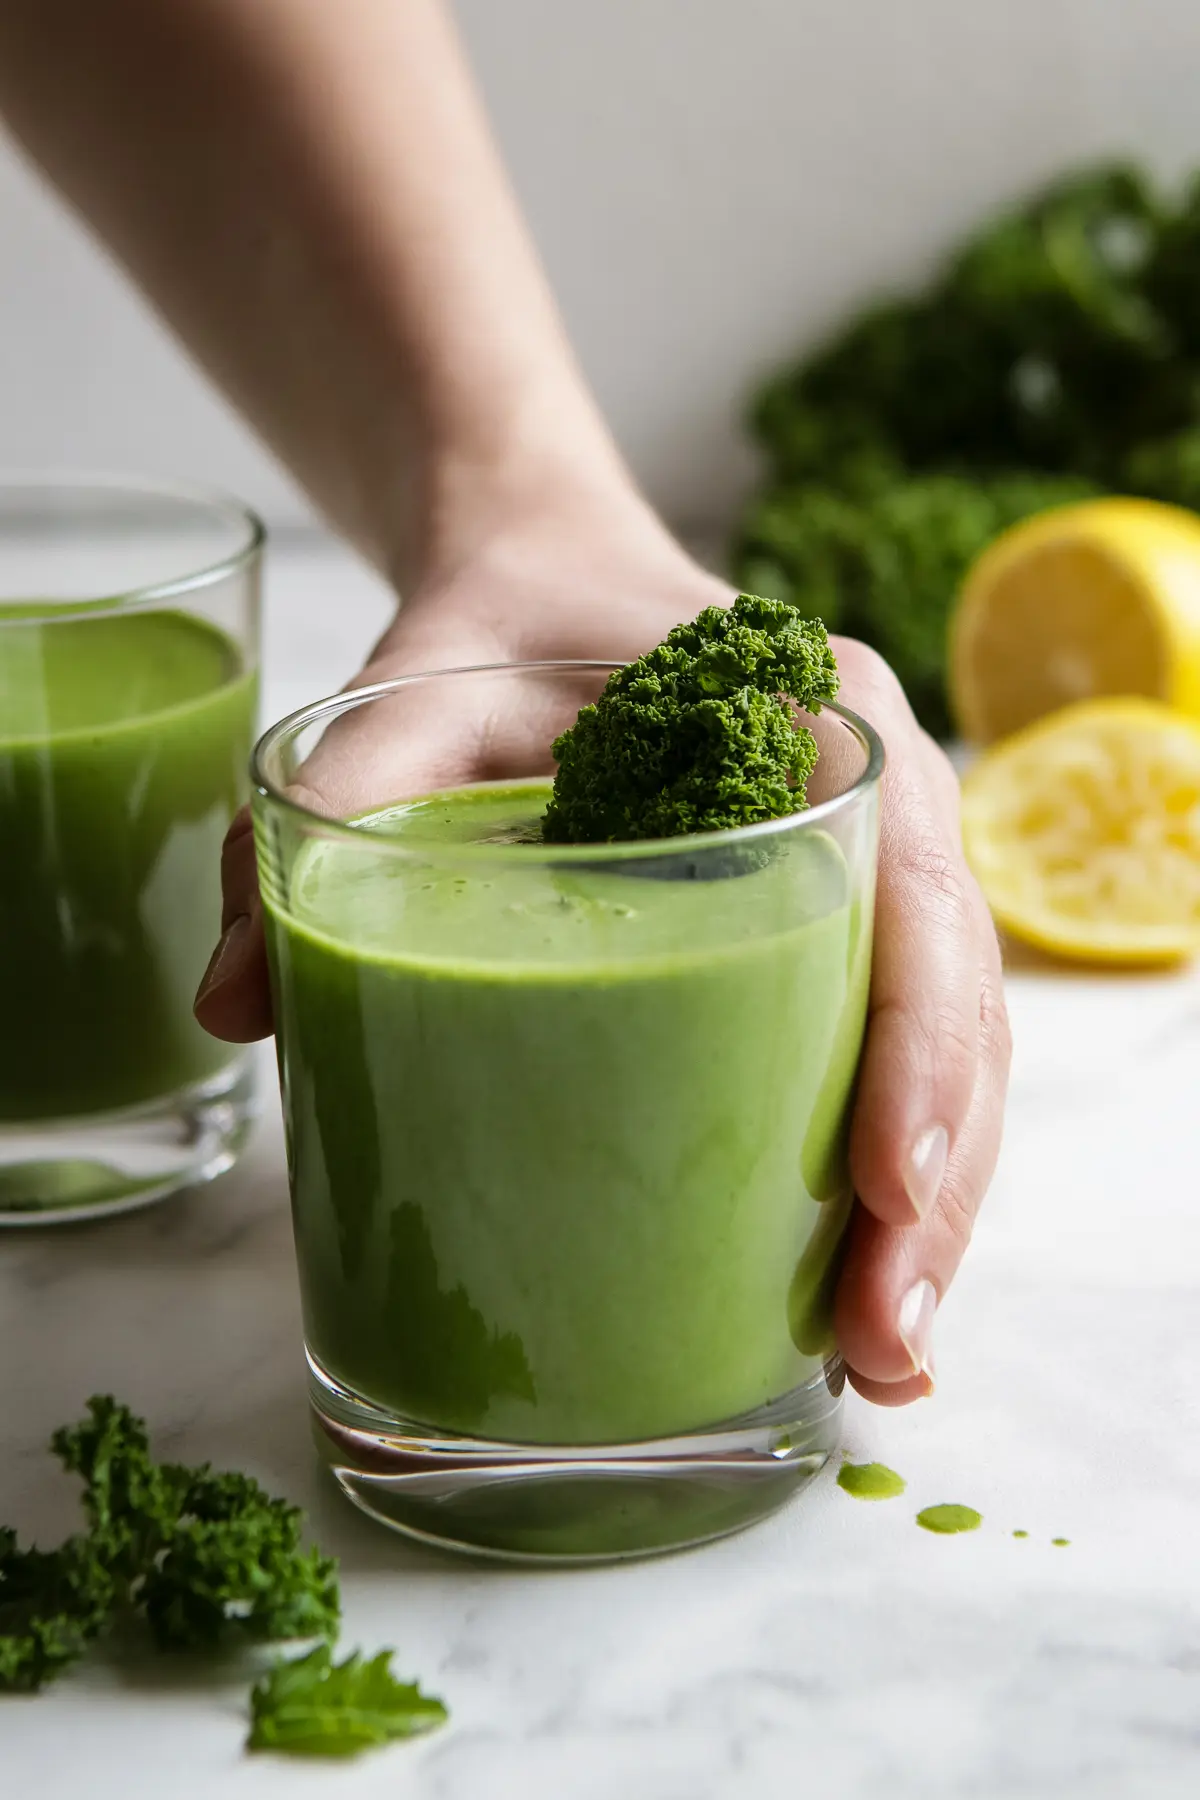 Hand Holding a Glass with Green Smoothie.